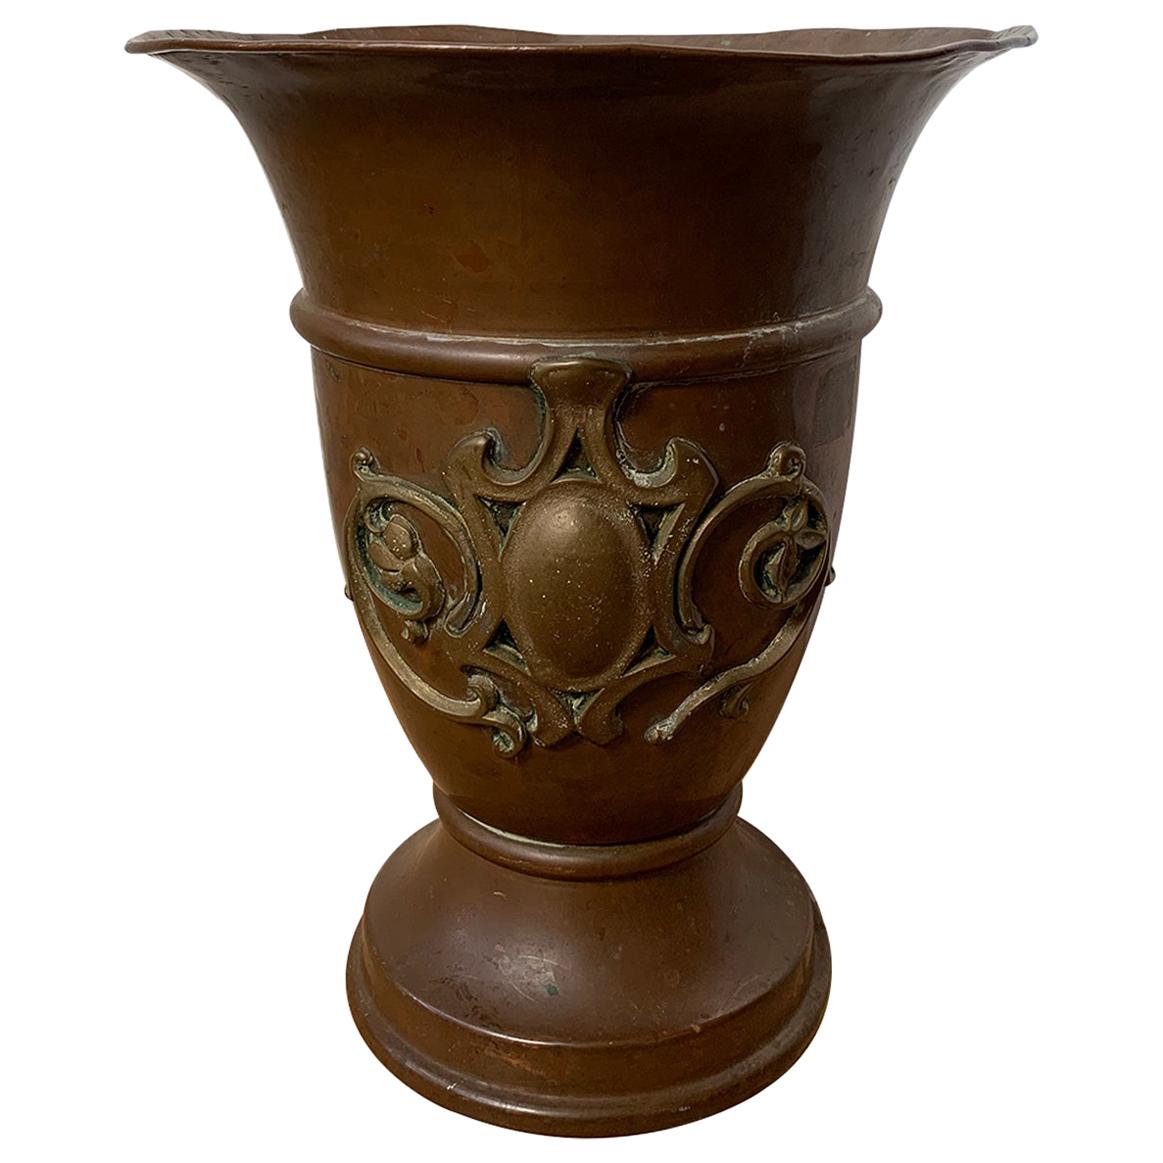 Late 19th Century Copper Cachepot with Crest by Joseph Heinrichs, Marked